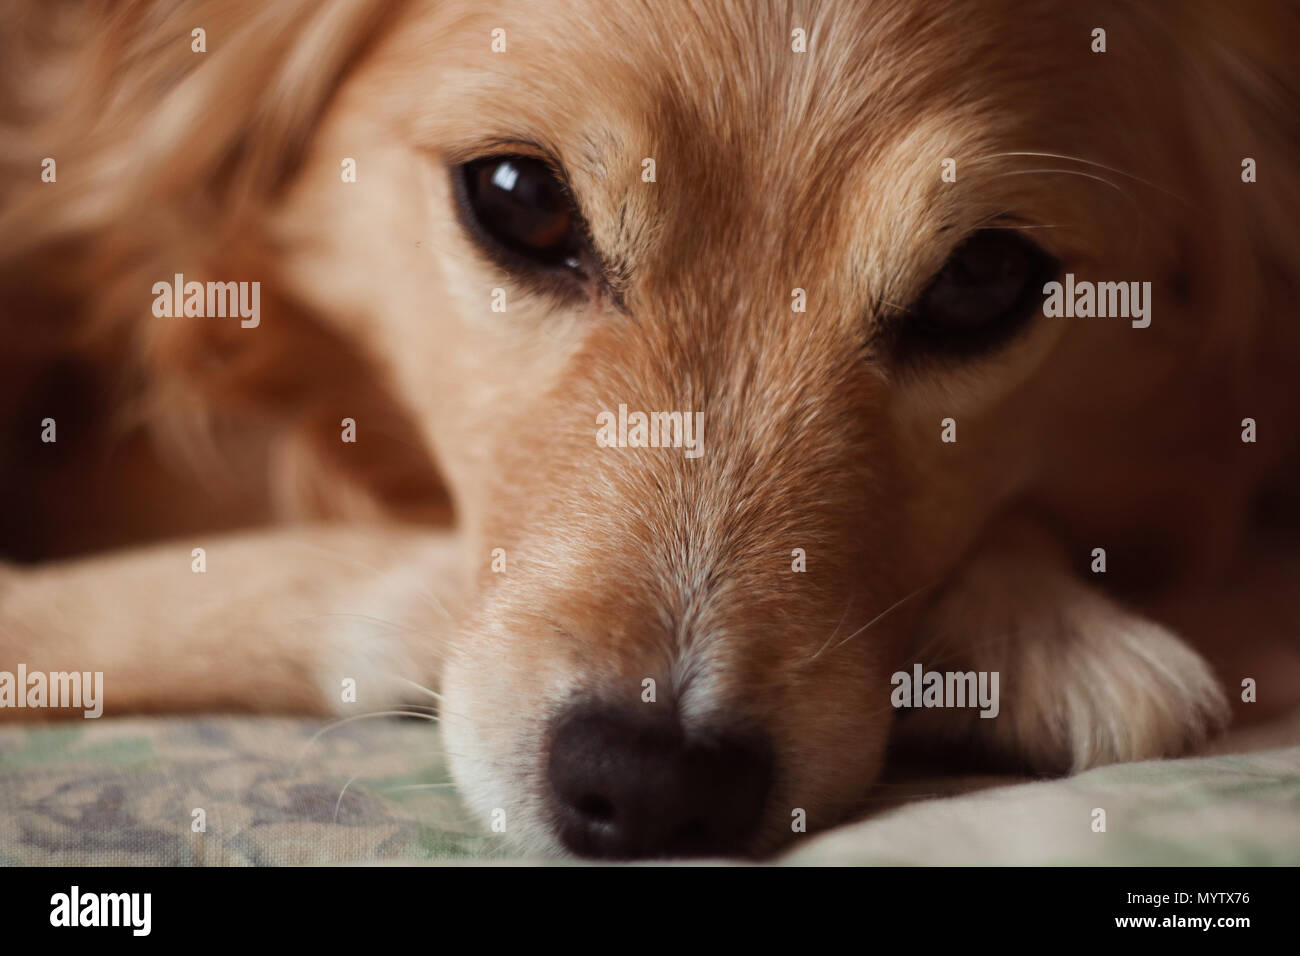 Cute friendly dog face close up Stock Photo